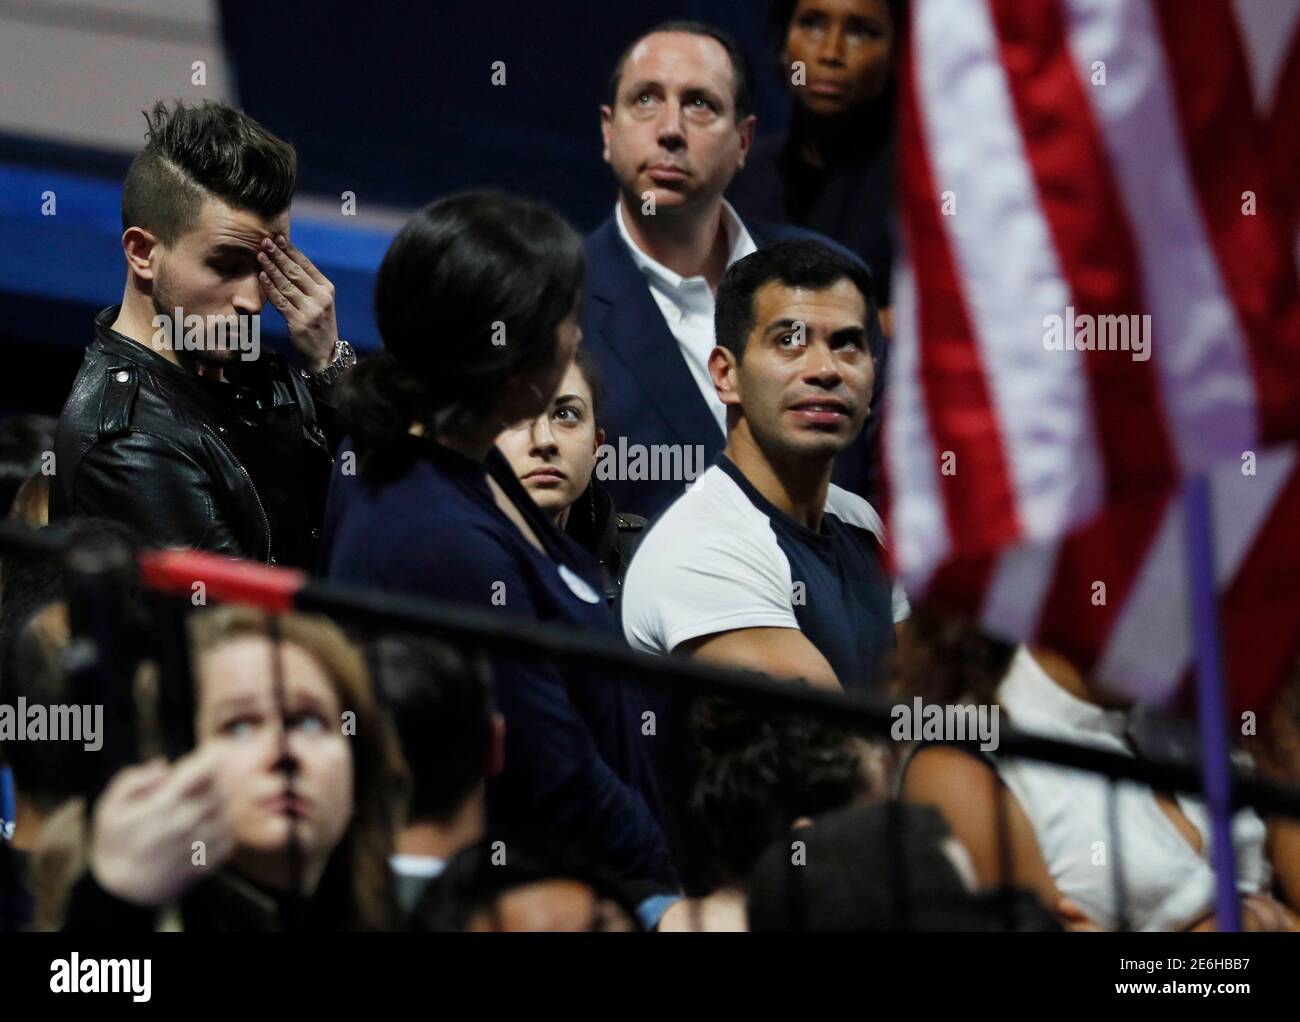 Supporters of Democratic U.S. presidential nominee Hillary Clinton watch election returns at the election night rally in New York, U.S., November 8, 2016. REUTERS/Rick Wilking Stock Photo